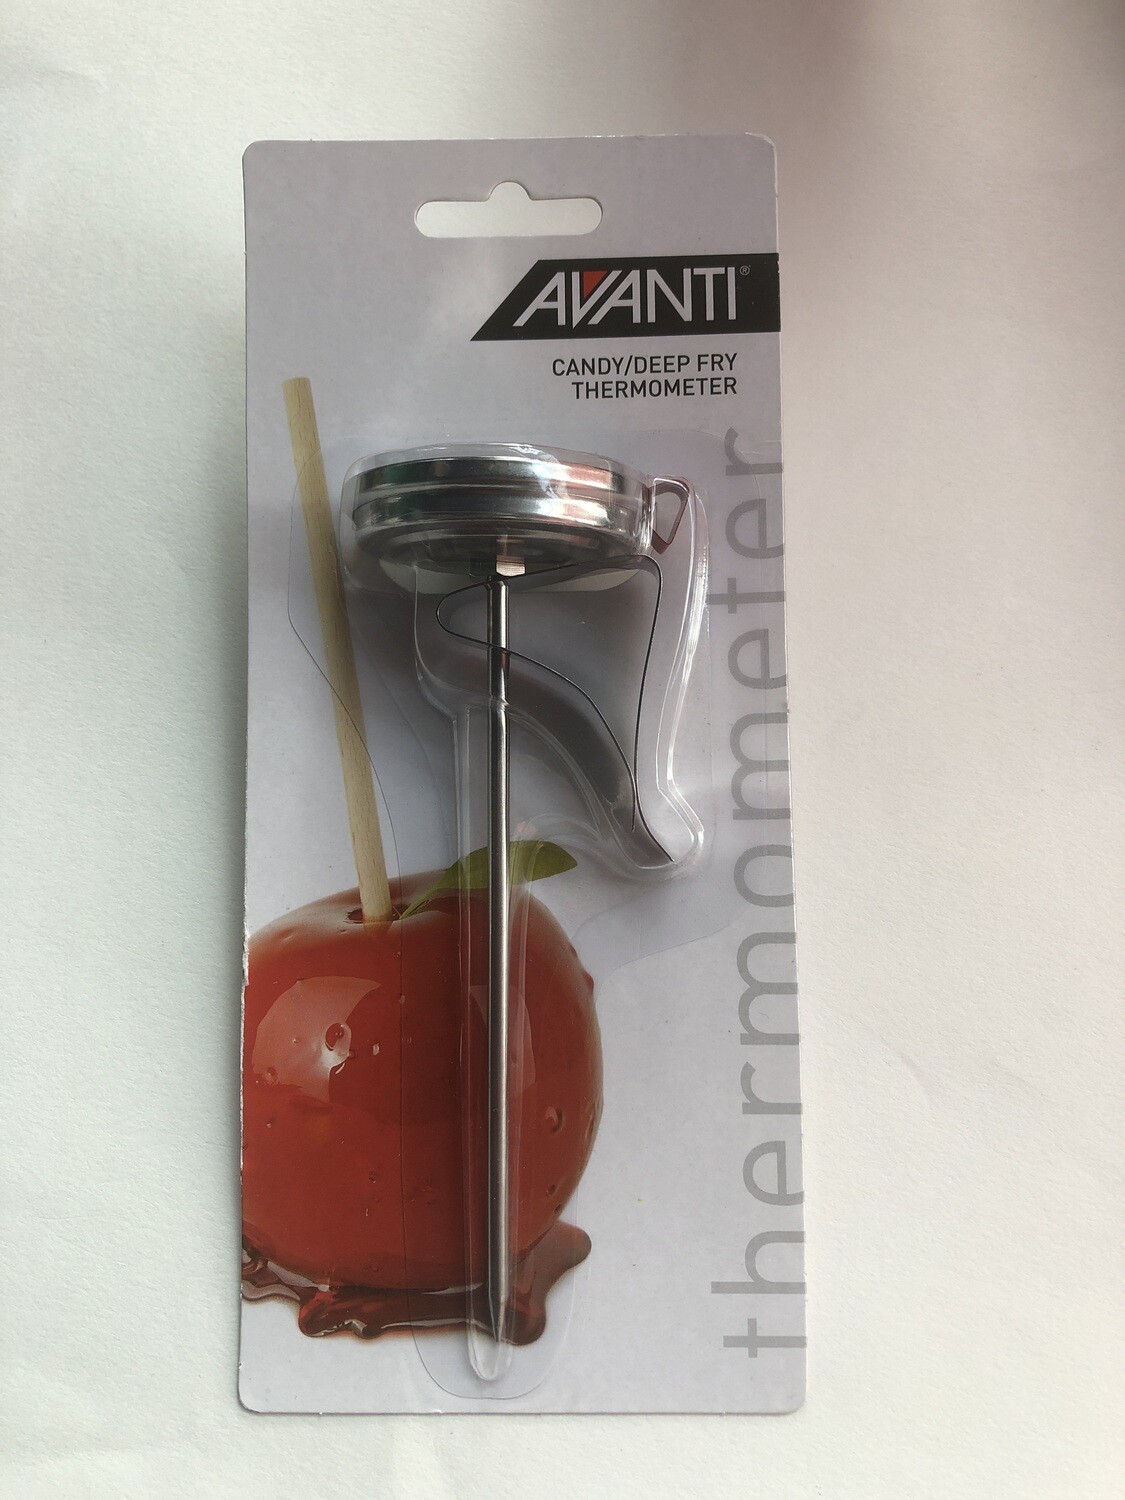 AVANTI - Candy/Deep Fry thermometer